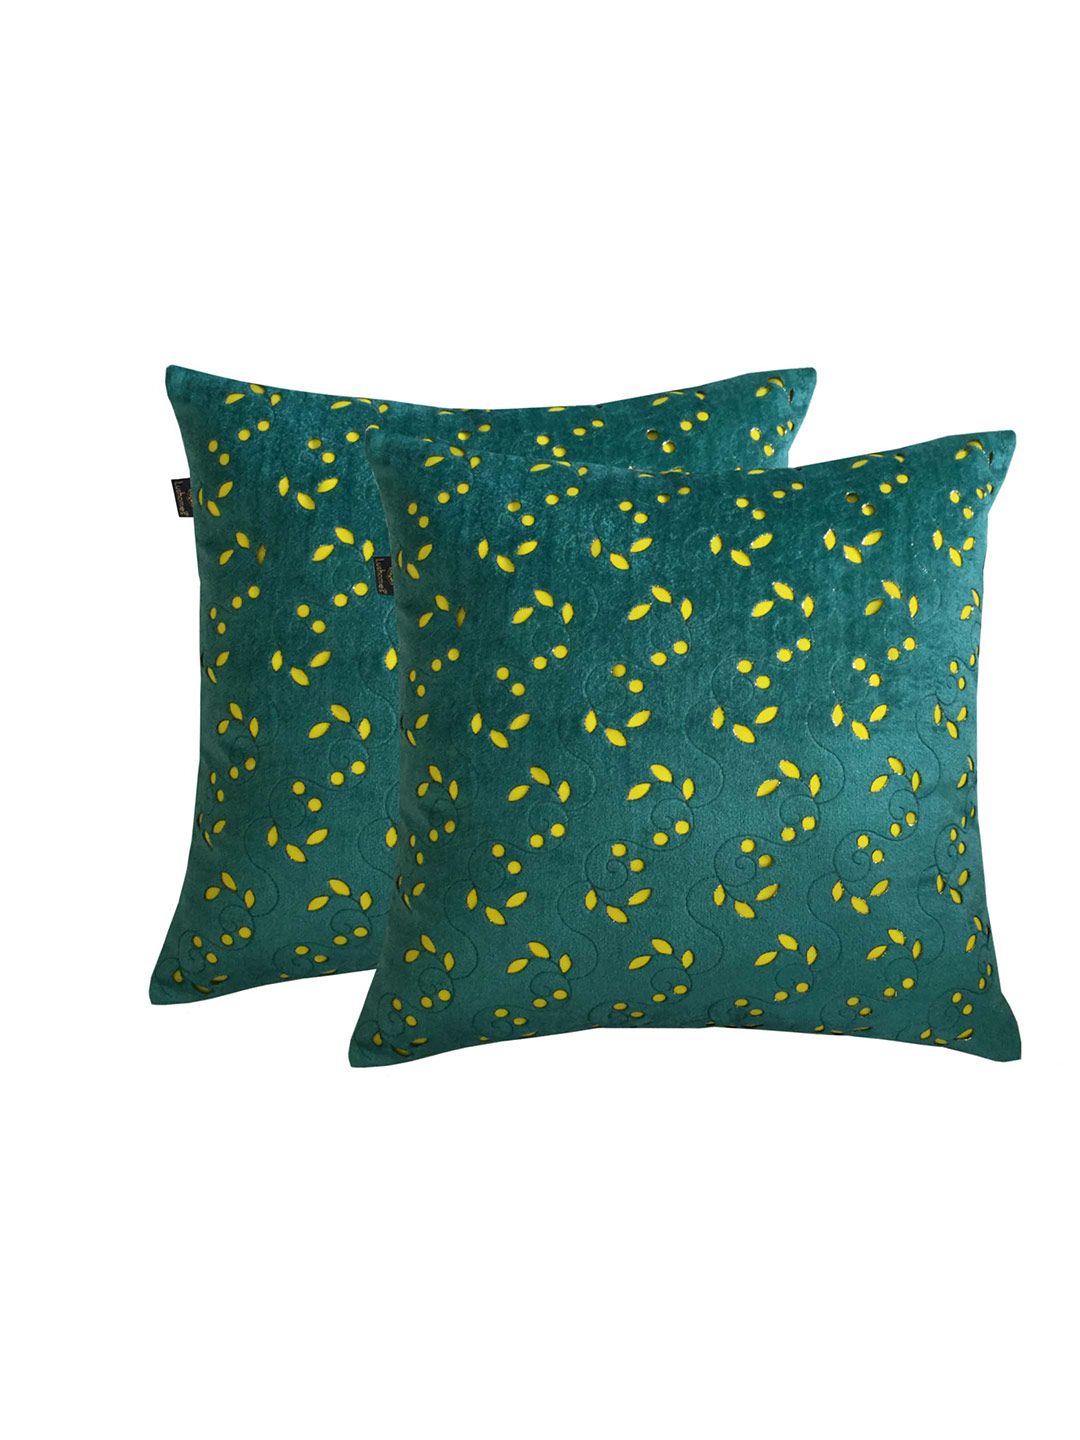 Lushomes Set Of 2 Green Velvet Fabric with Laser Cut Square Cushion Covers Price in India